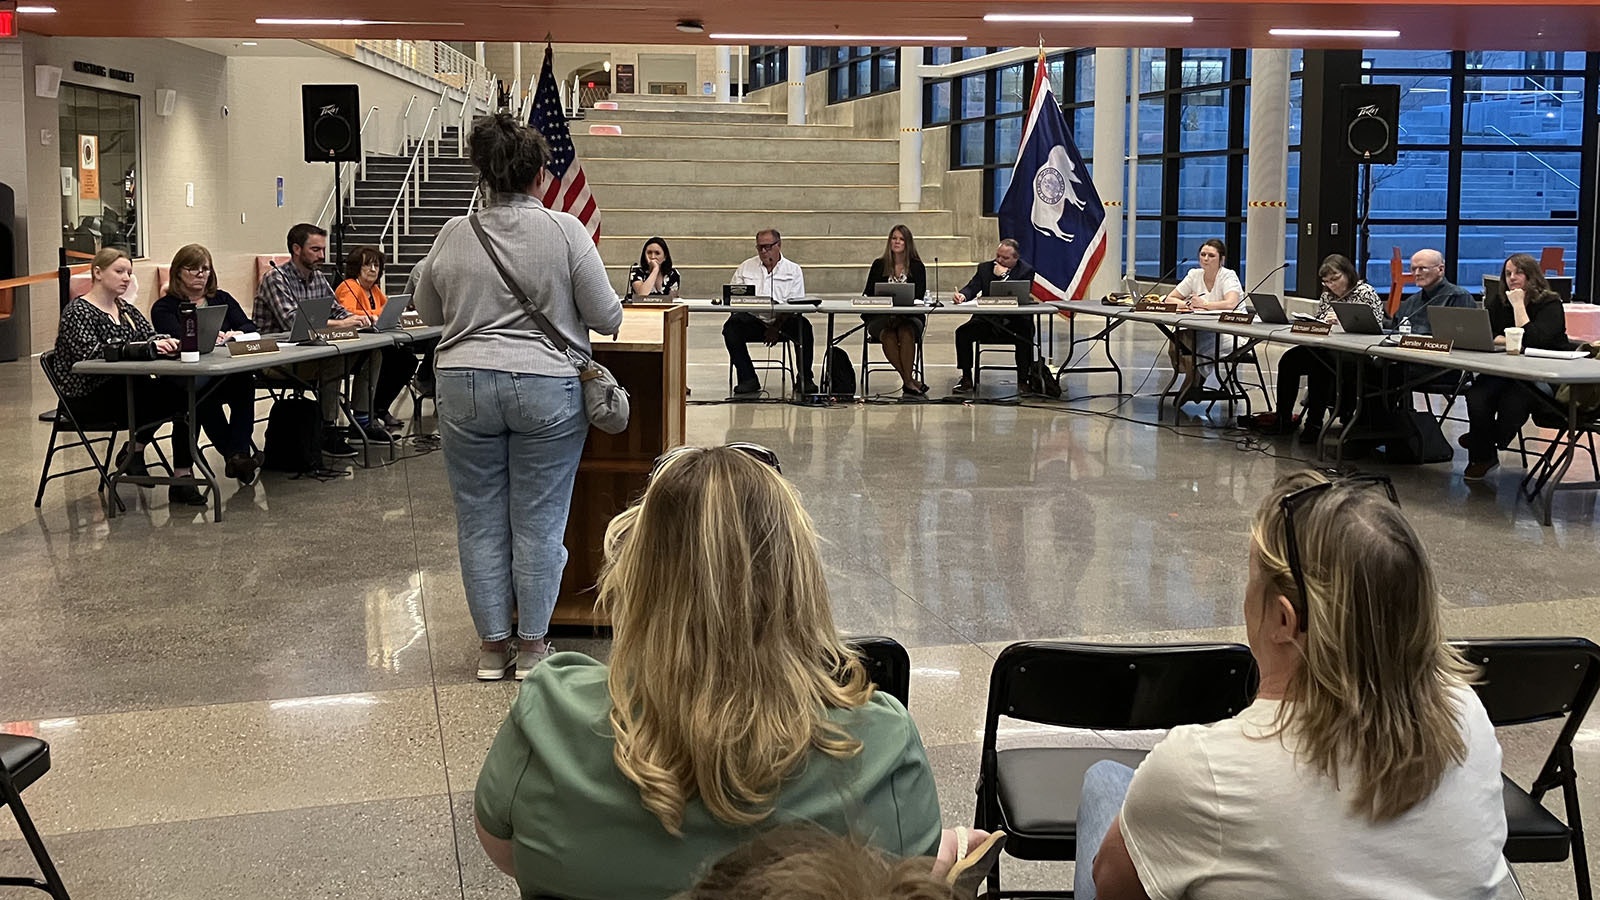 The Natrona County Board of Education heard from nearly a dozen parents and concerned citizens about the culture of violence and bullying that exists in the school district on Monday.